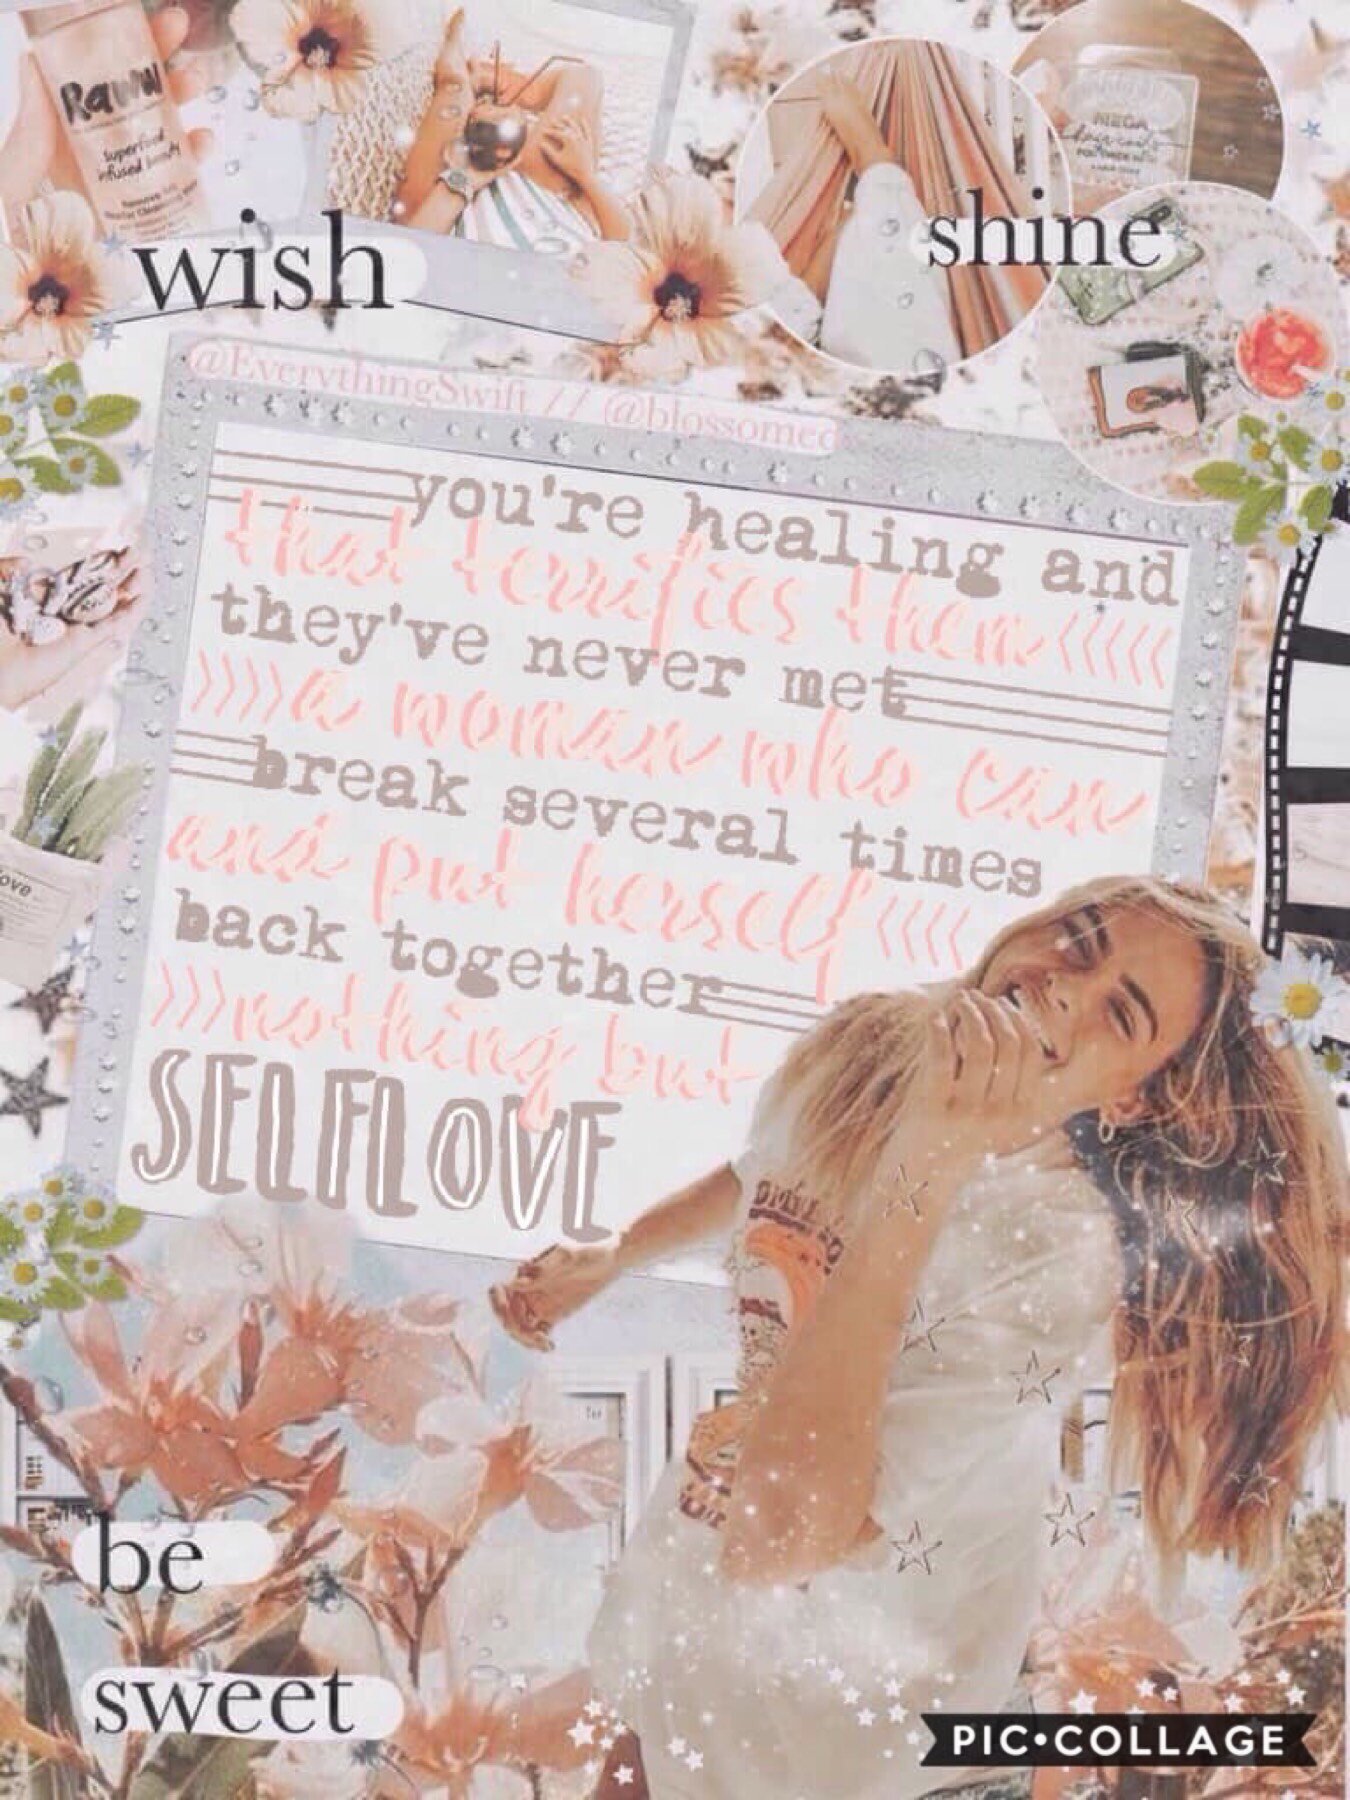 c o l l a b   w i t h   t h e   o n e   &   o n l y . . . 
@EverythingSwift, aka Abby !! Abby is so kind and amazing 💖 she’s soo good at making collages ⭐️ Abby did the text and I did the BG go follow her NOW !! 🌸💦